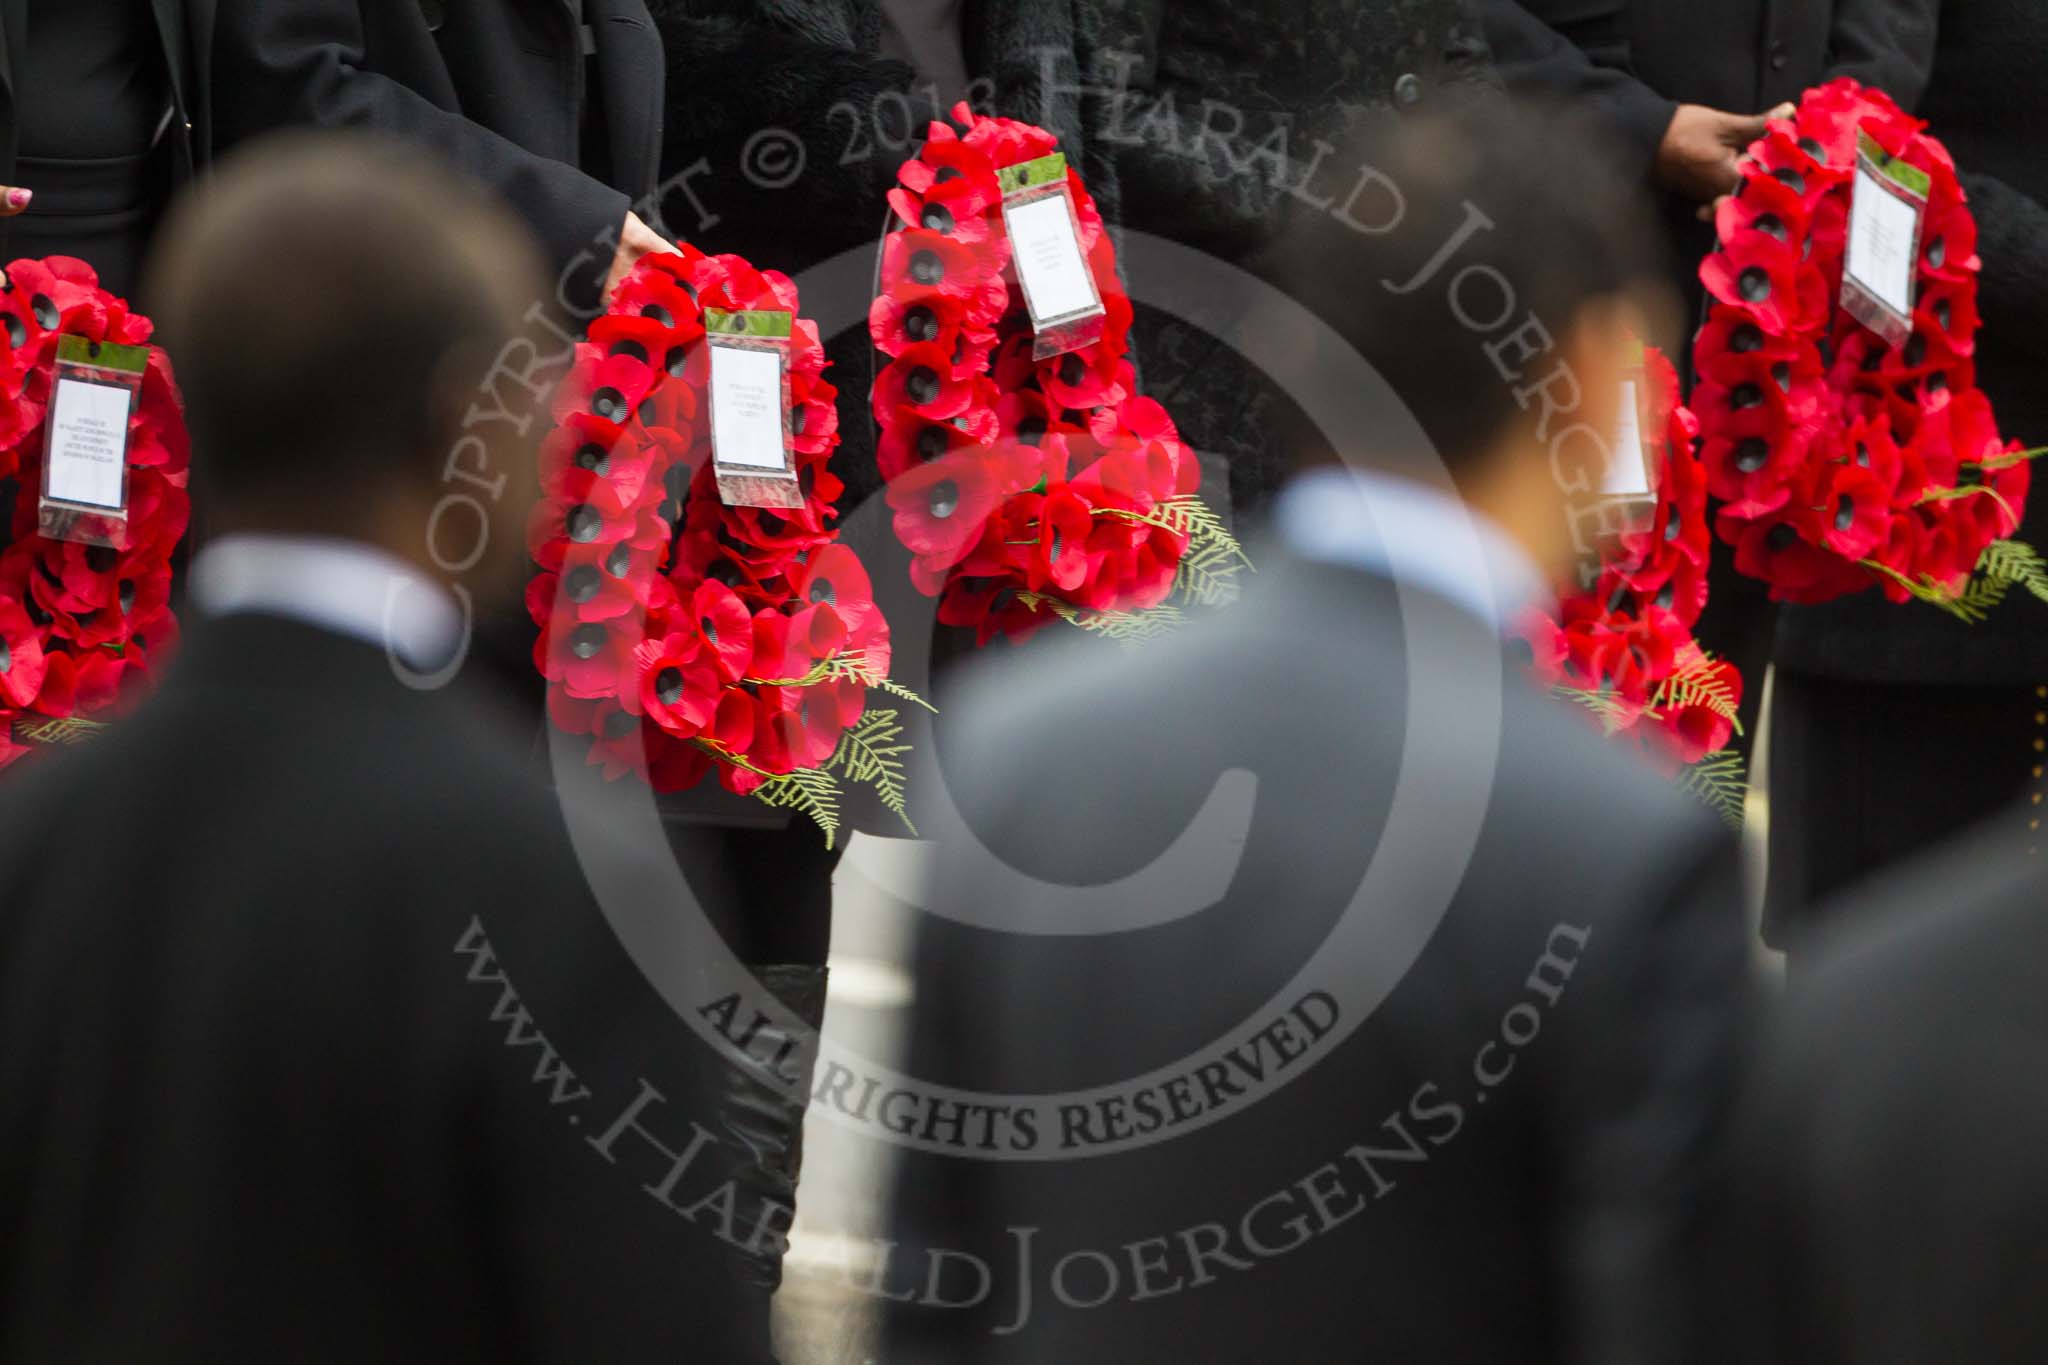 Remembrance Sunday at the Cenotaph 2015: The wreaths carried by the High Commissioners standing at the Cenotaph. Image #236, 08 November 2015 11:09 Whitehall, London, UK